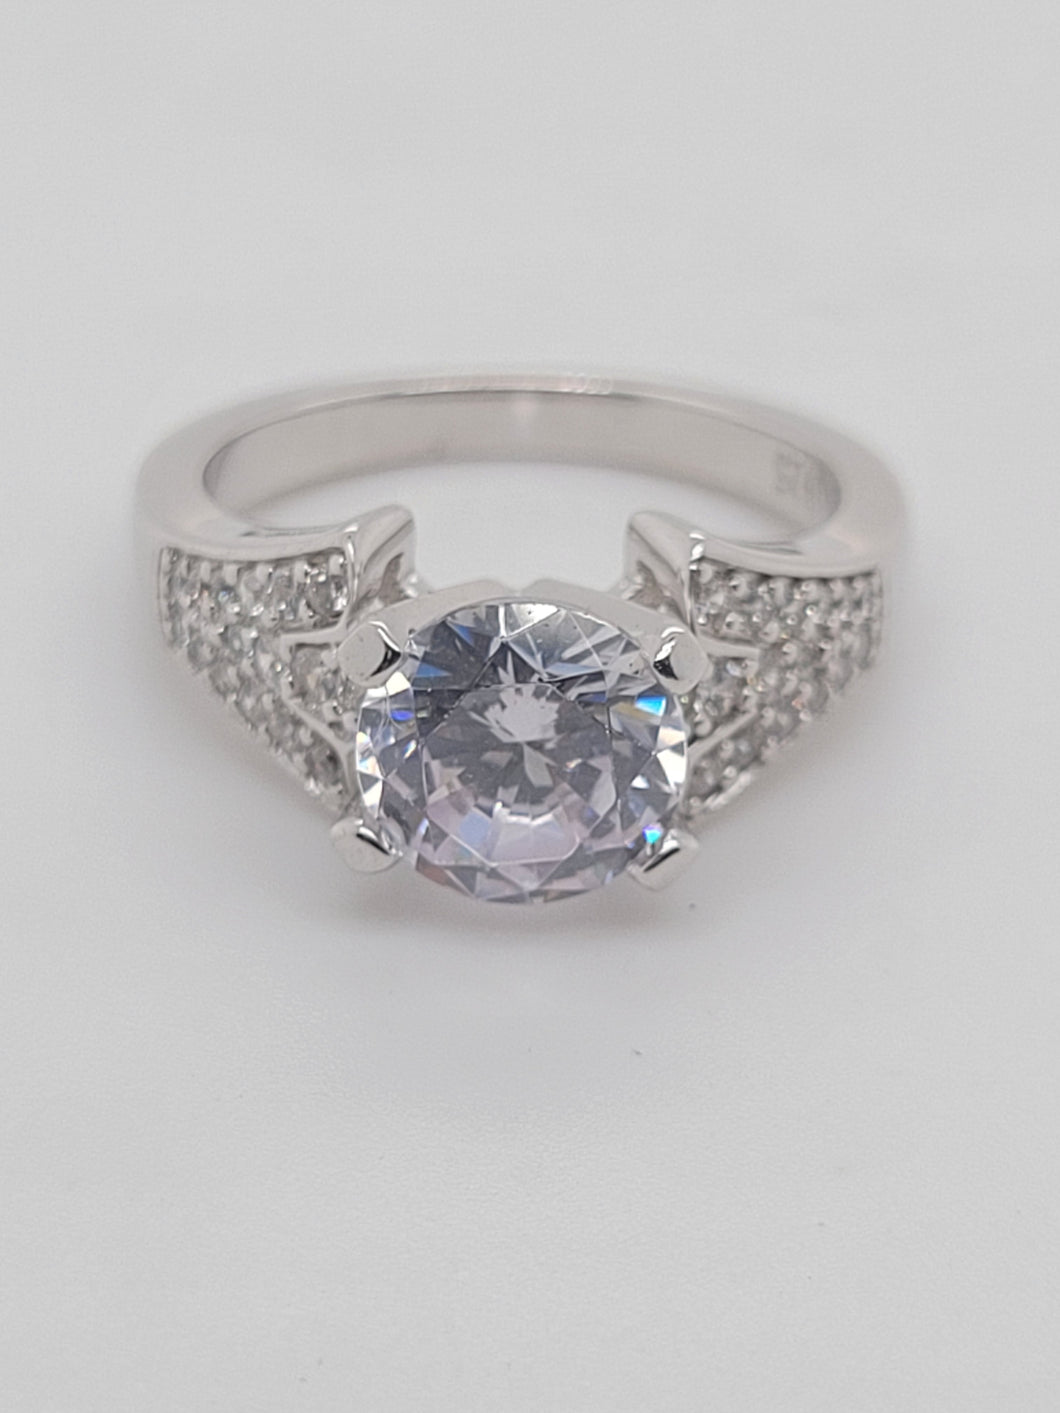 CZ Engagement Style Sterling Silver Ring